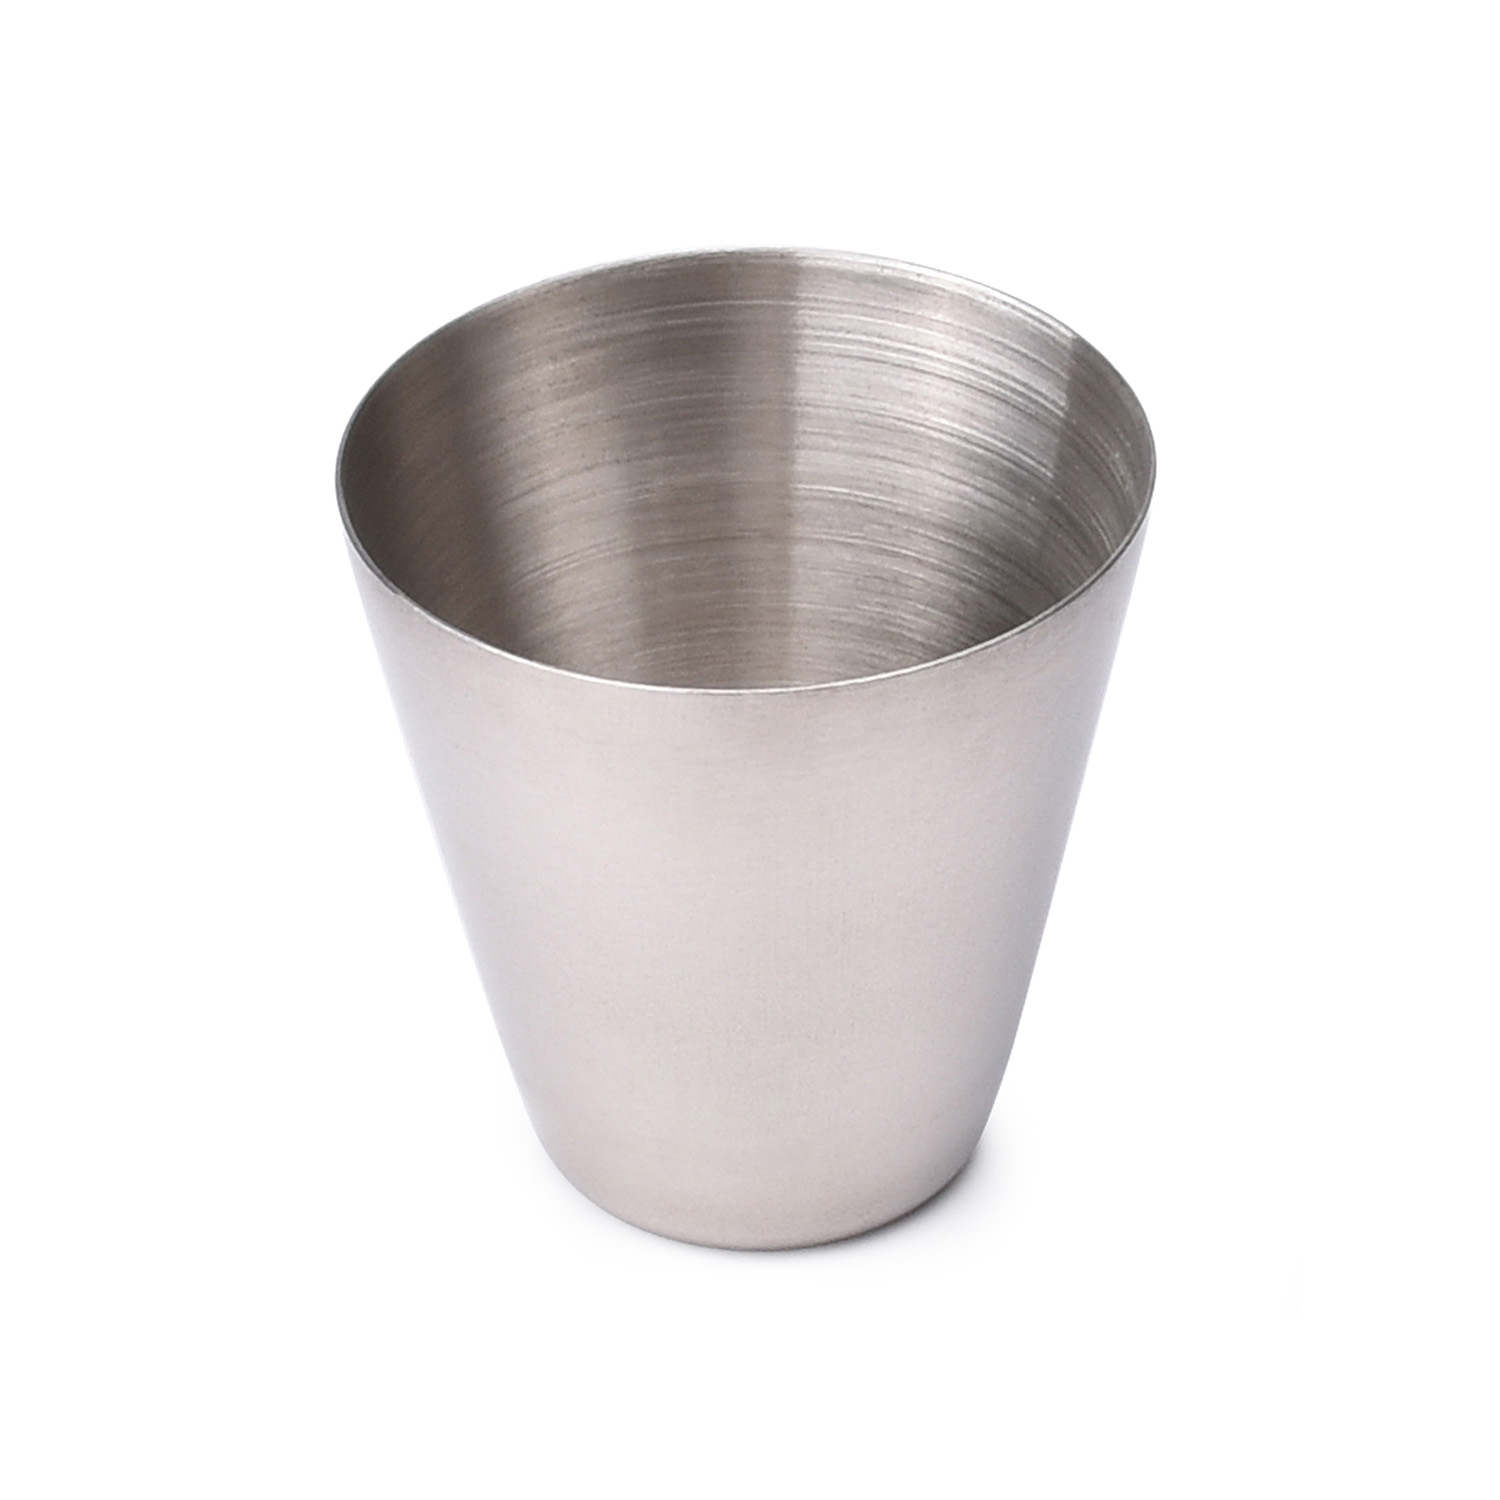 https://www.waterbottle.tech/wp-content/uploads/2019/01/30ml-household-wine-glass-thickened-304-stainless-steel-small-cup-outdoor-portable-s203046-1.jpg